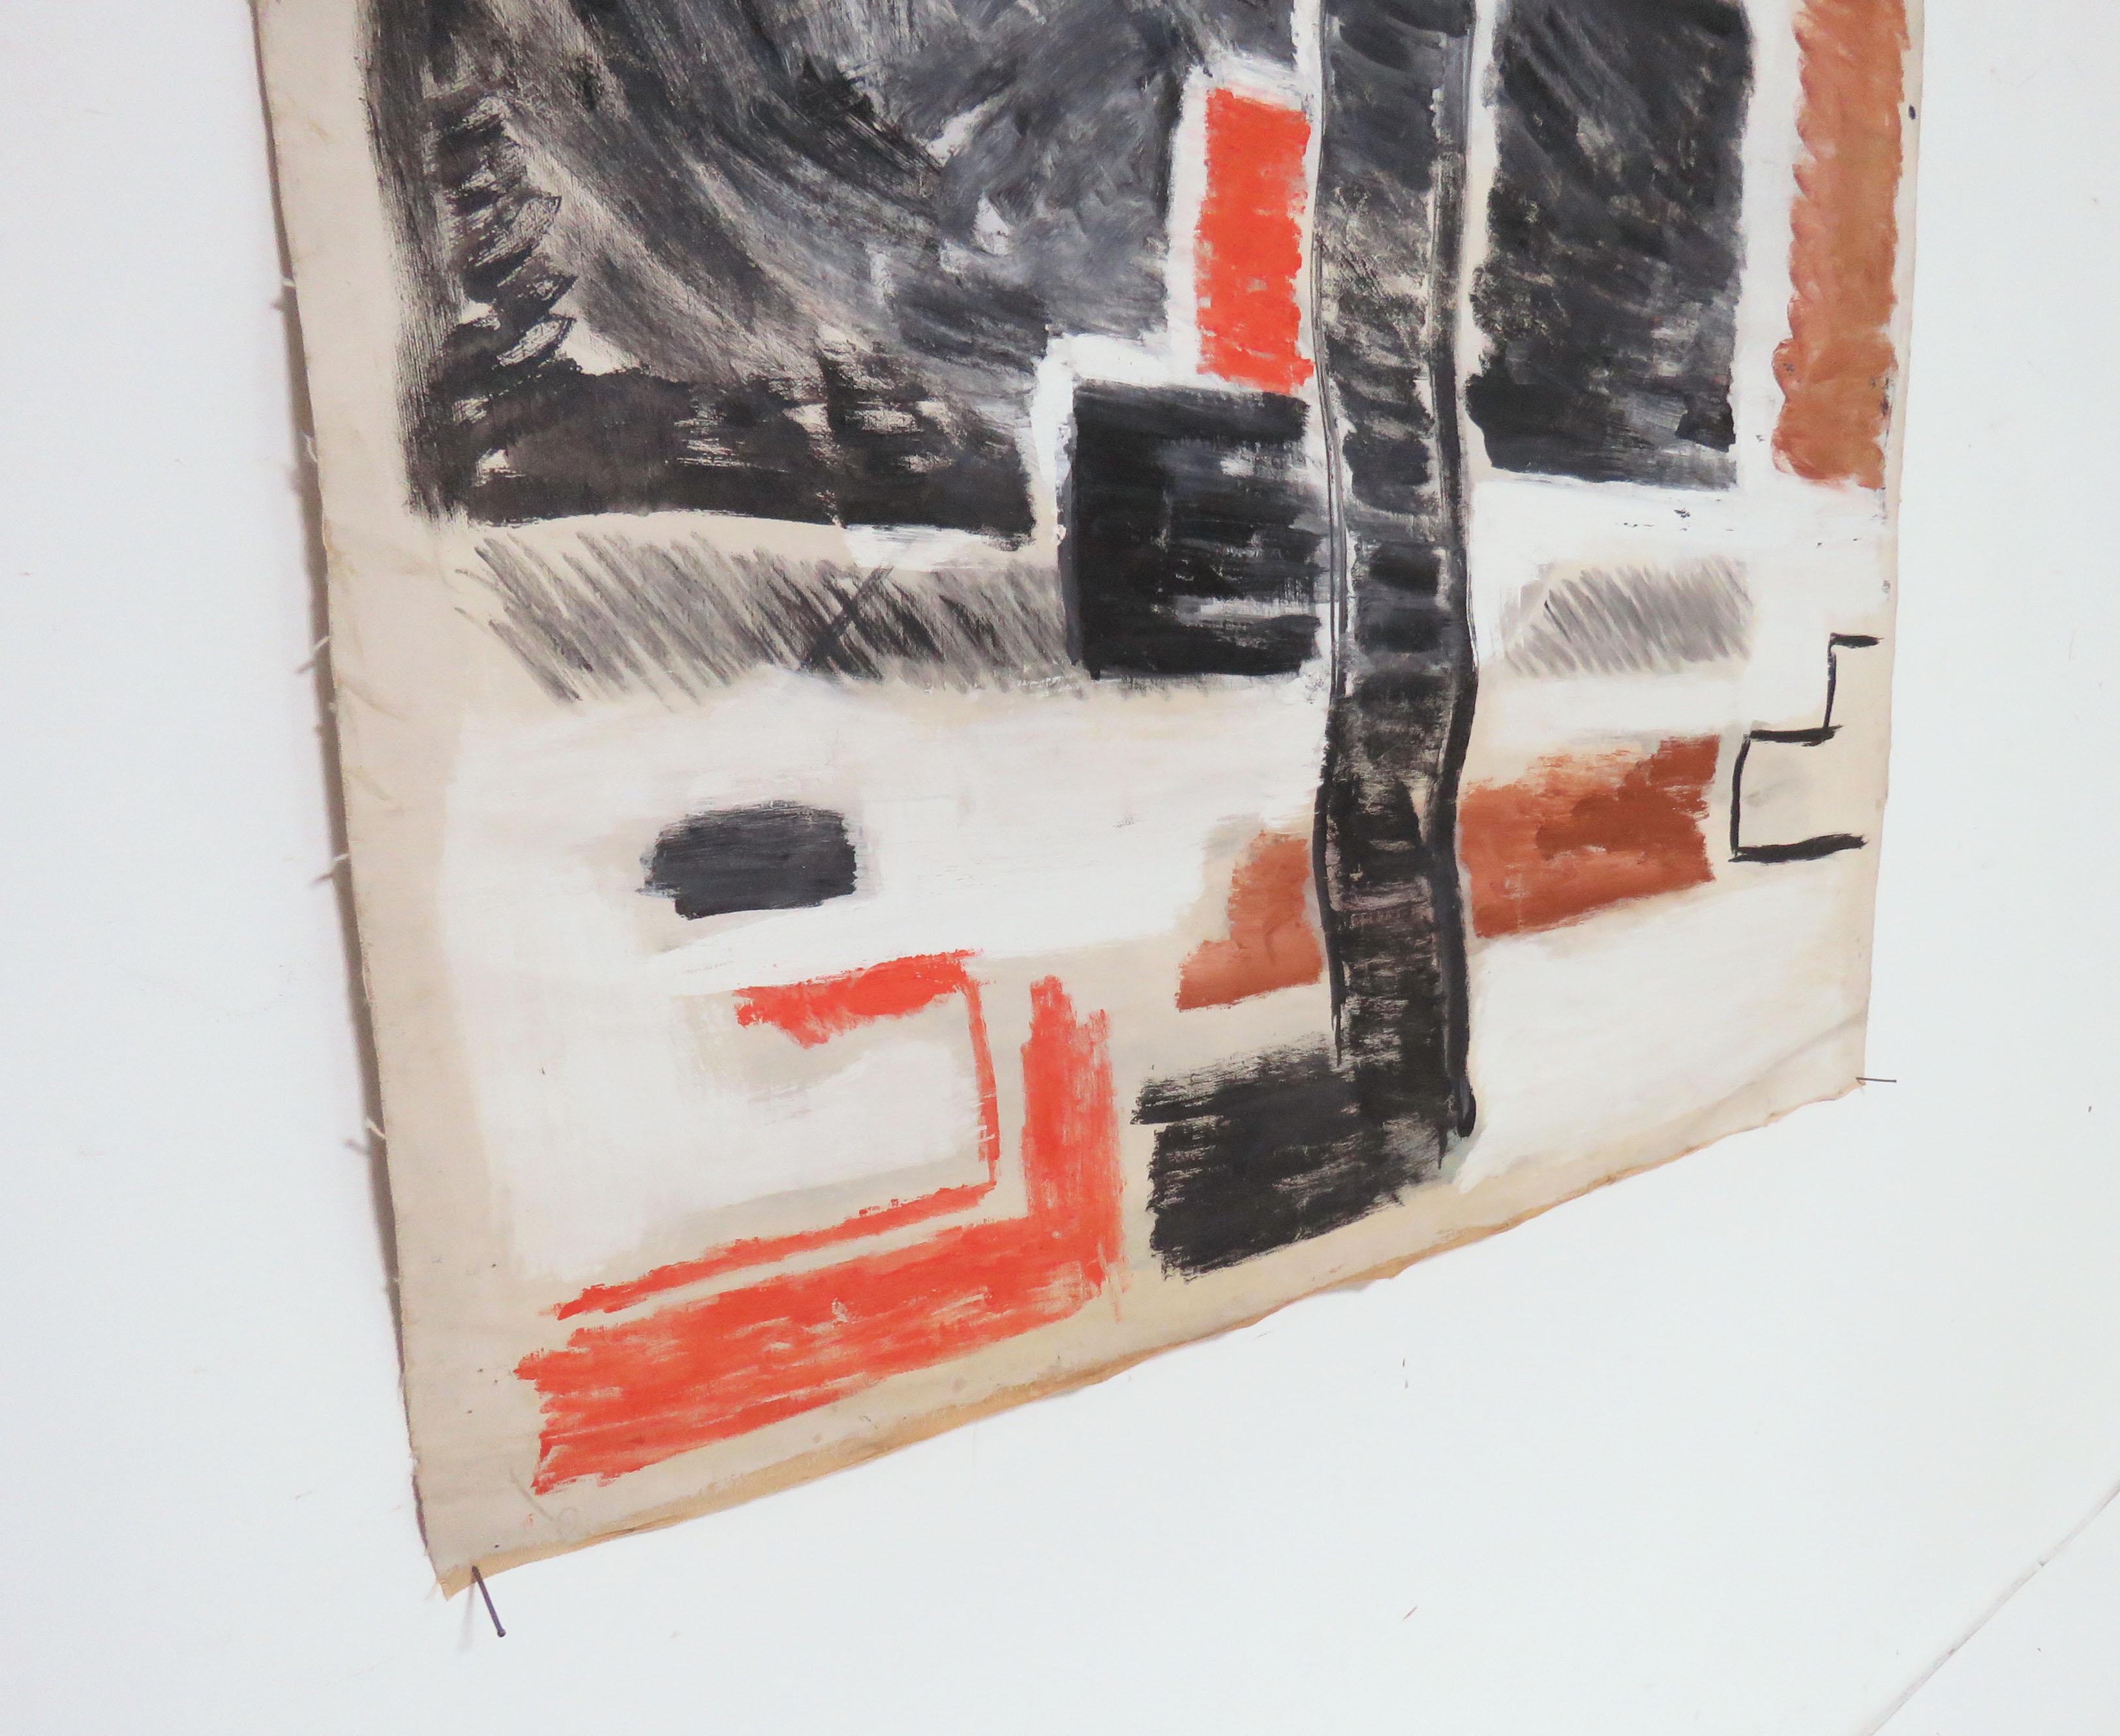 Mid-20th Century Modernist Abstract Painting by Phillip Callahan, circa 1960s